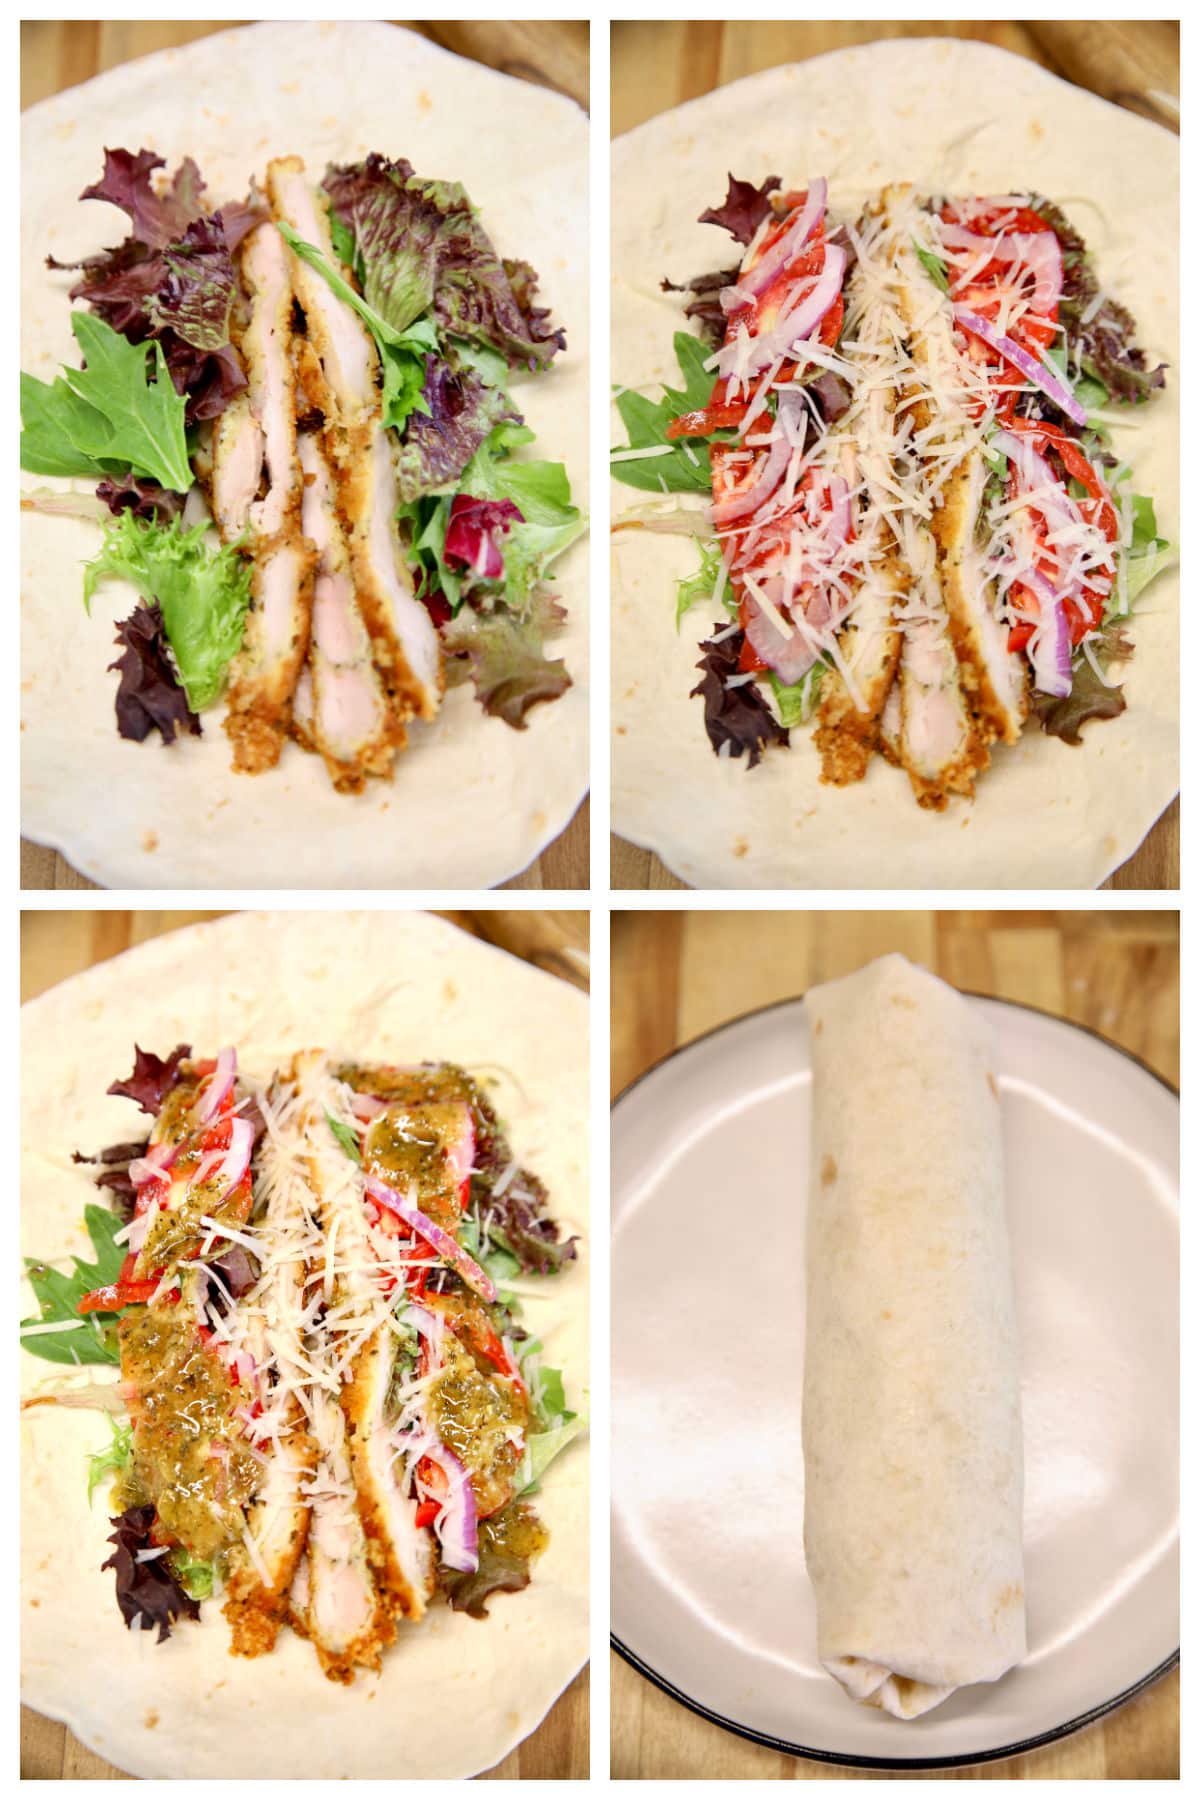 Collage making crispy chicken wraps with lettuce, tomato, onion, dressing.